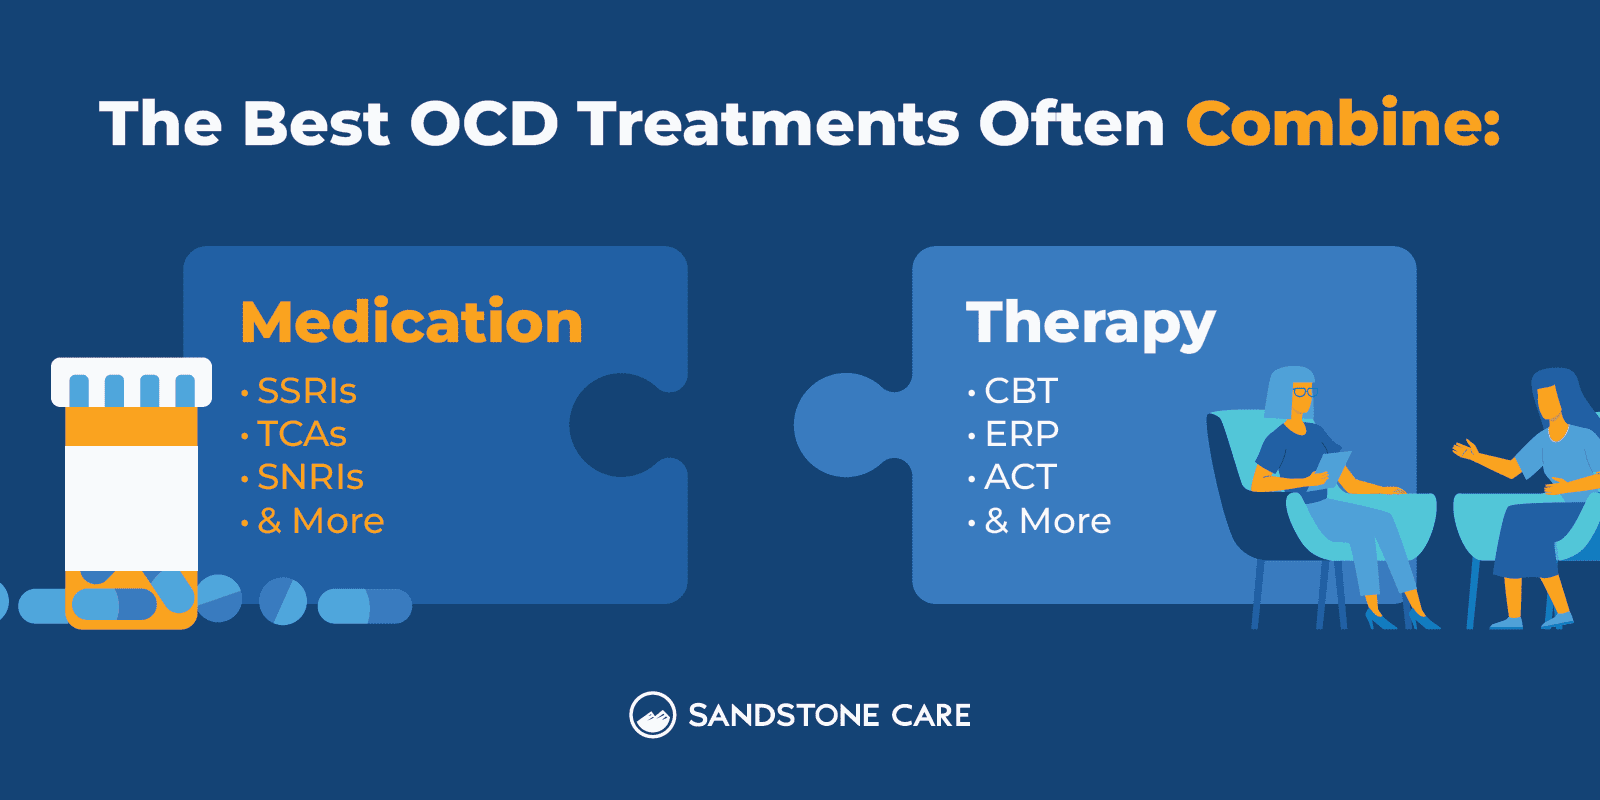 OCD Graphics 11 OCD Treatment OFten Combines Medicine And Therapy